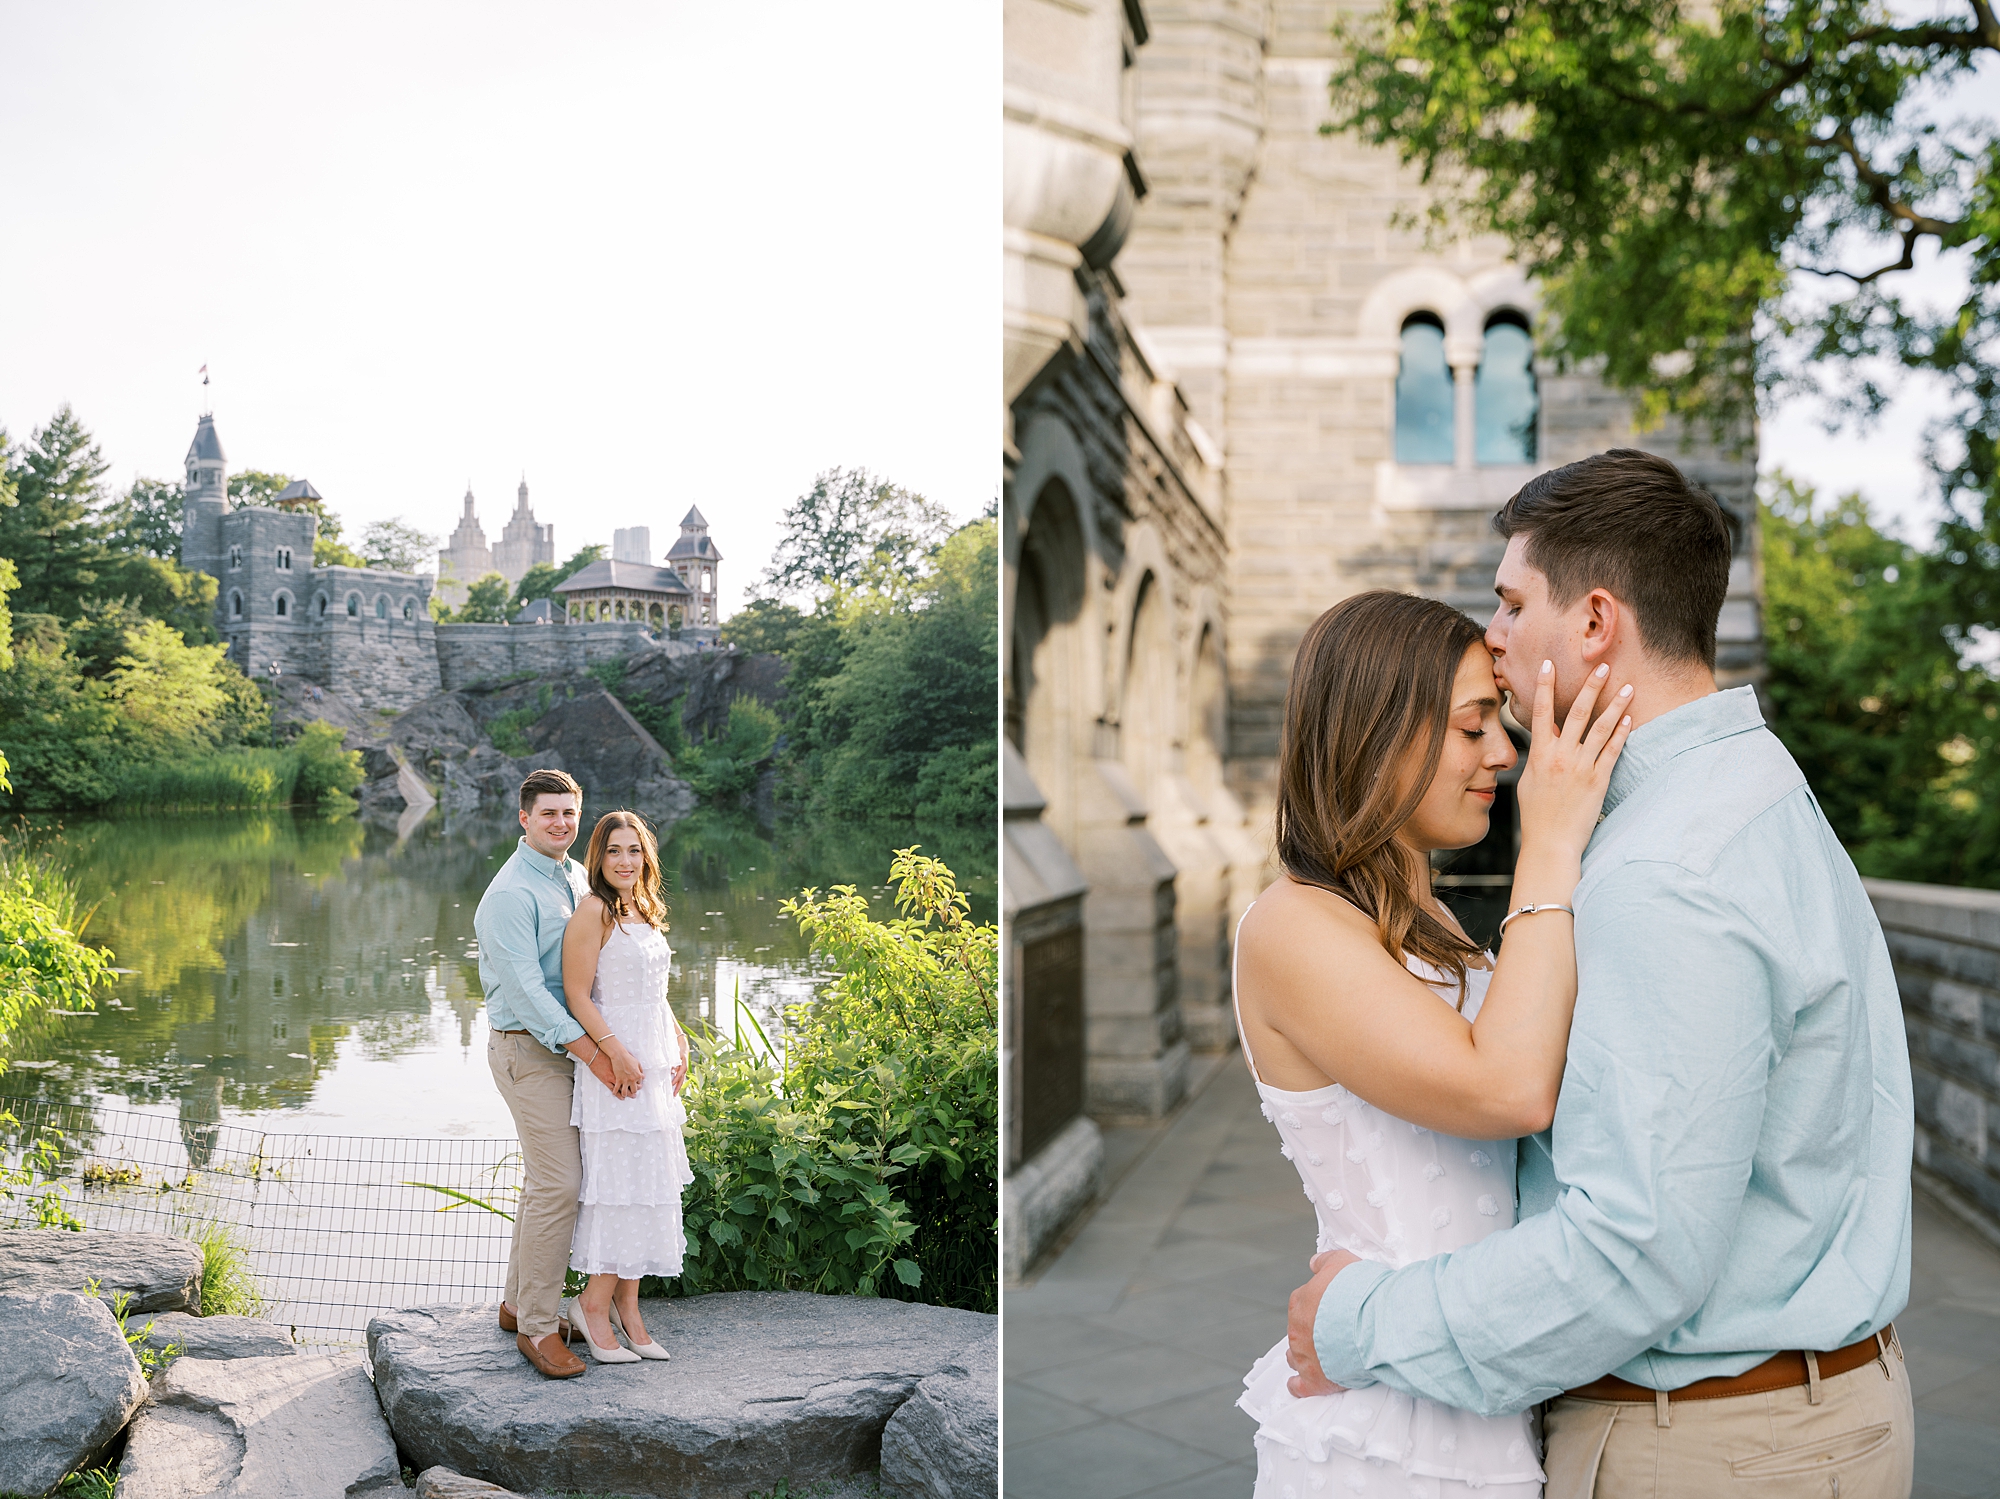 NYC engagement session in Central Park by fountain